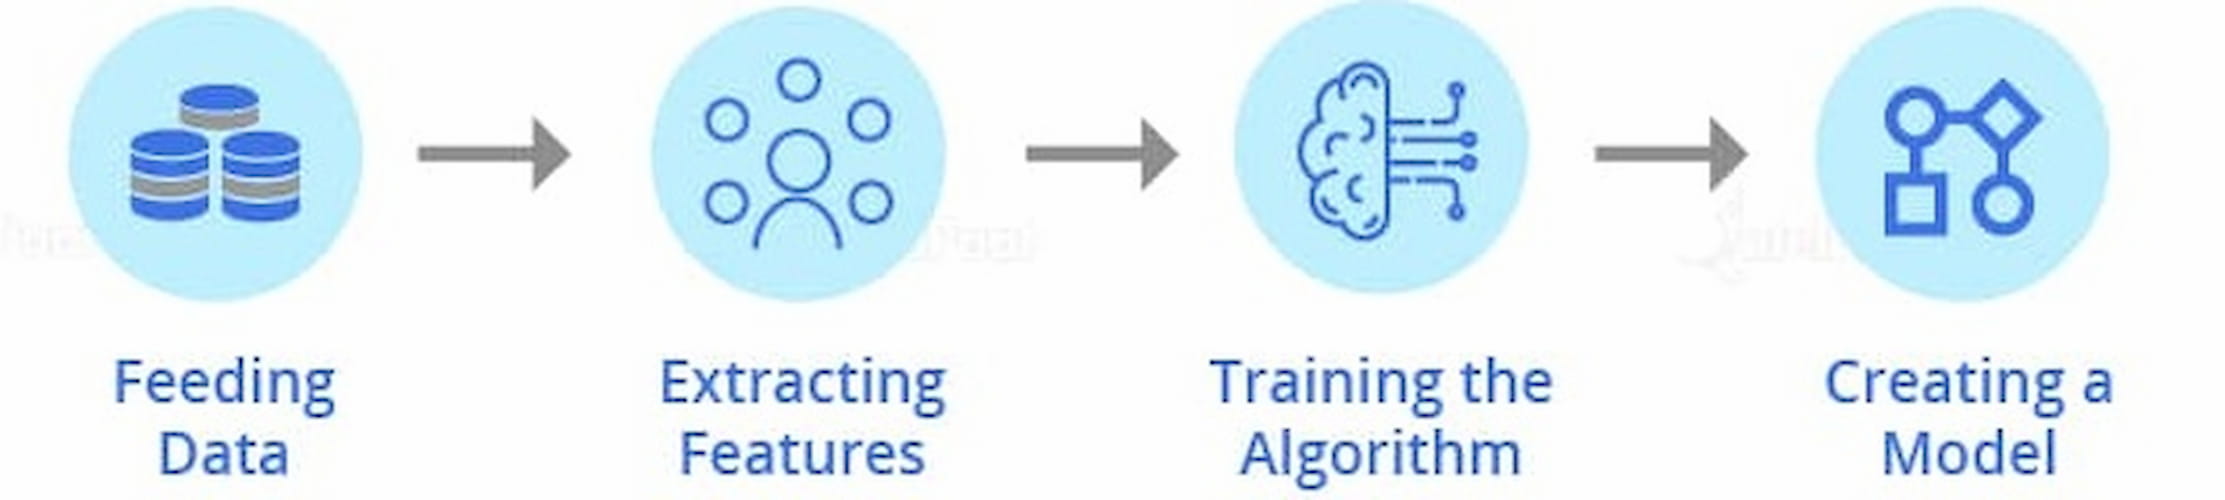 Fraud Detection Process with Machine Learning